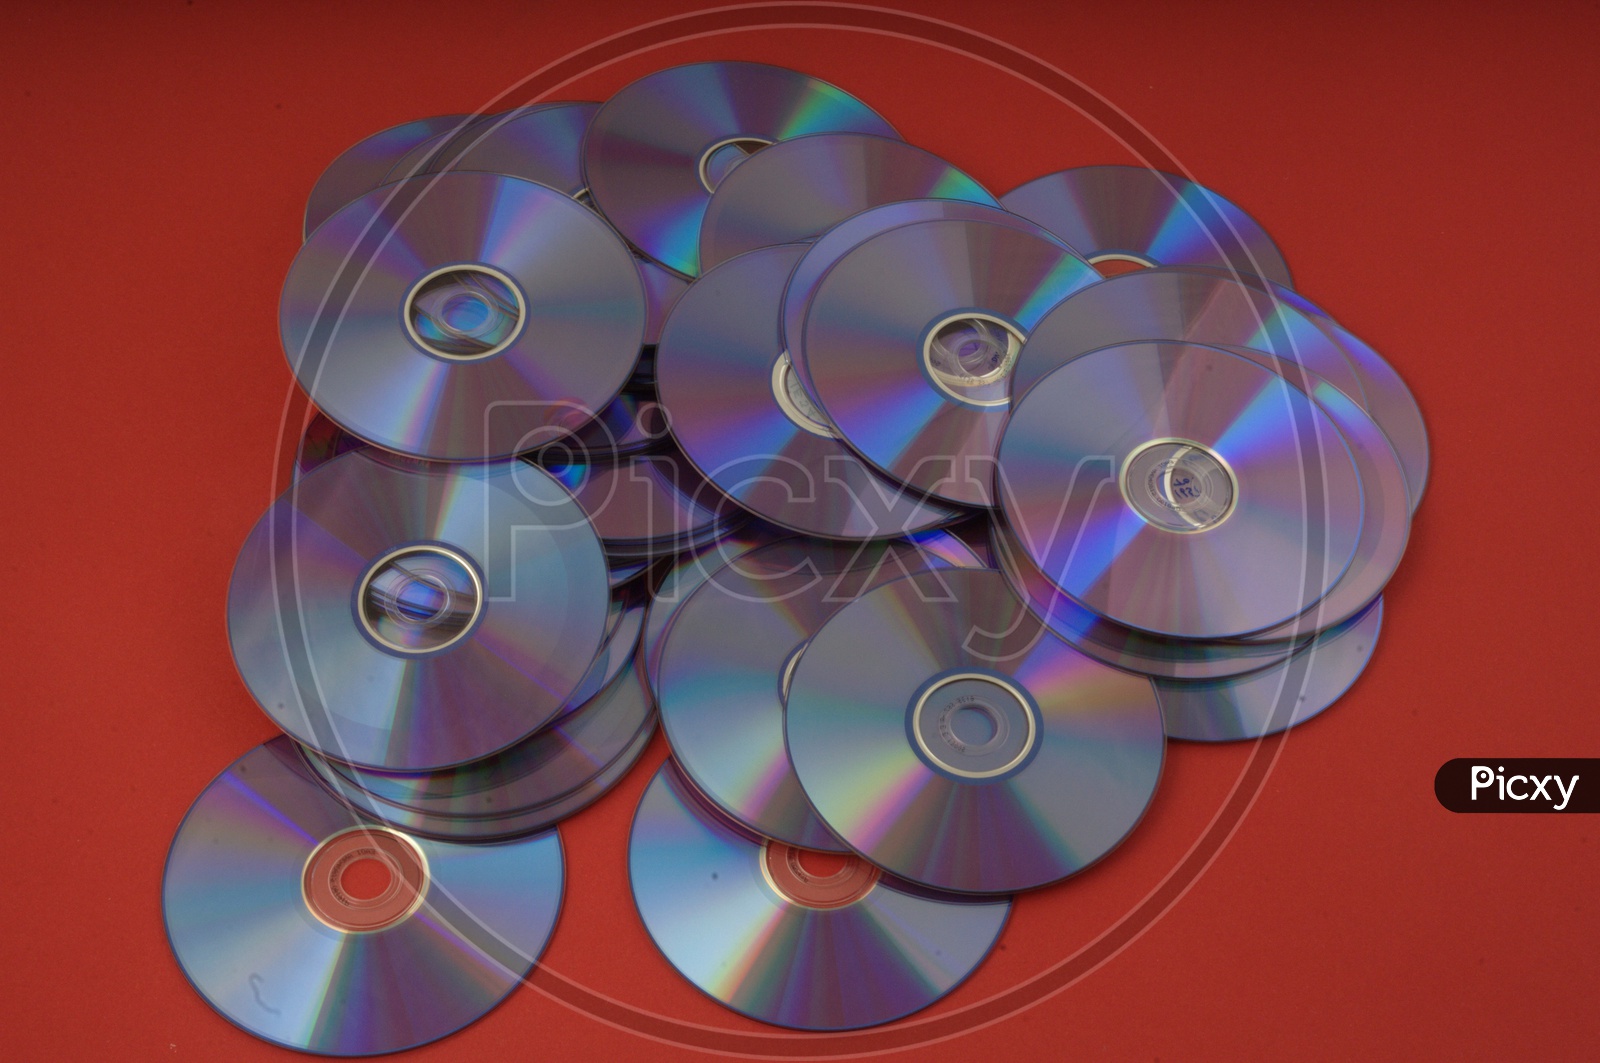 DVD / CD on Red Background